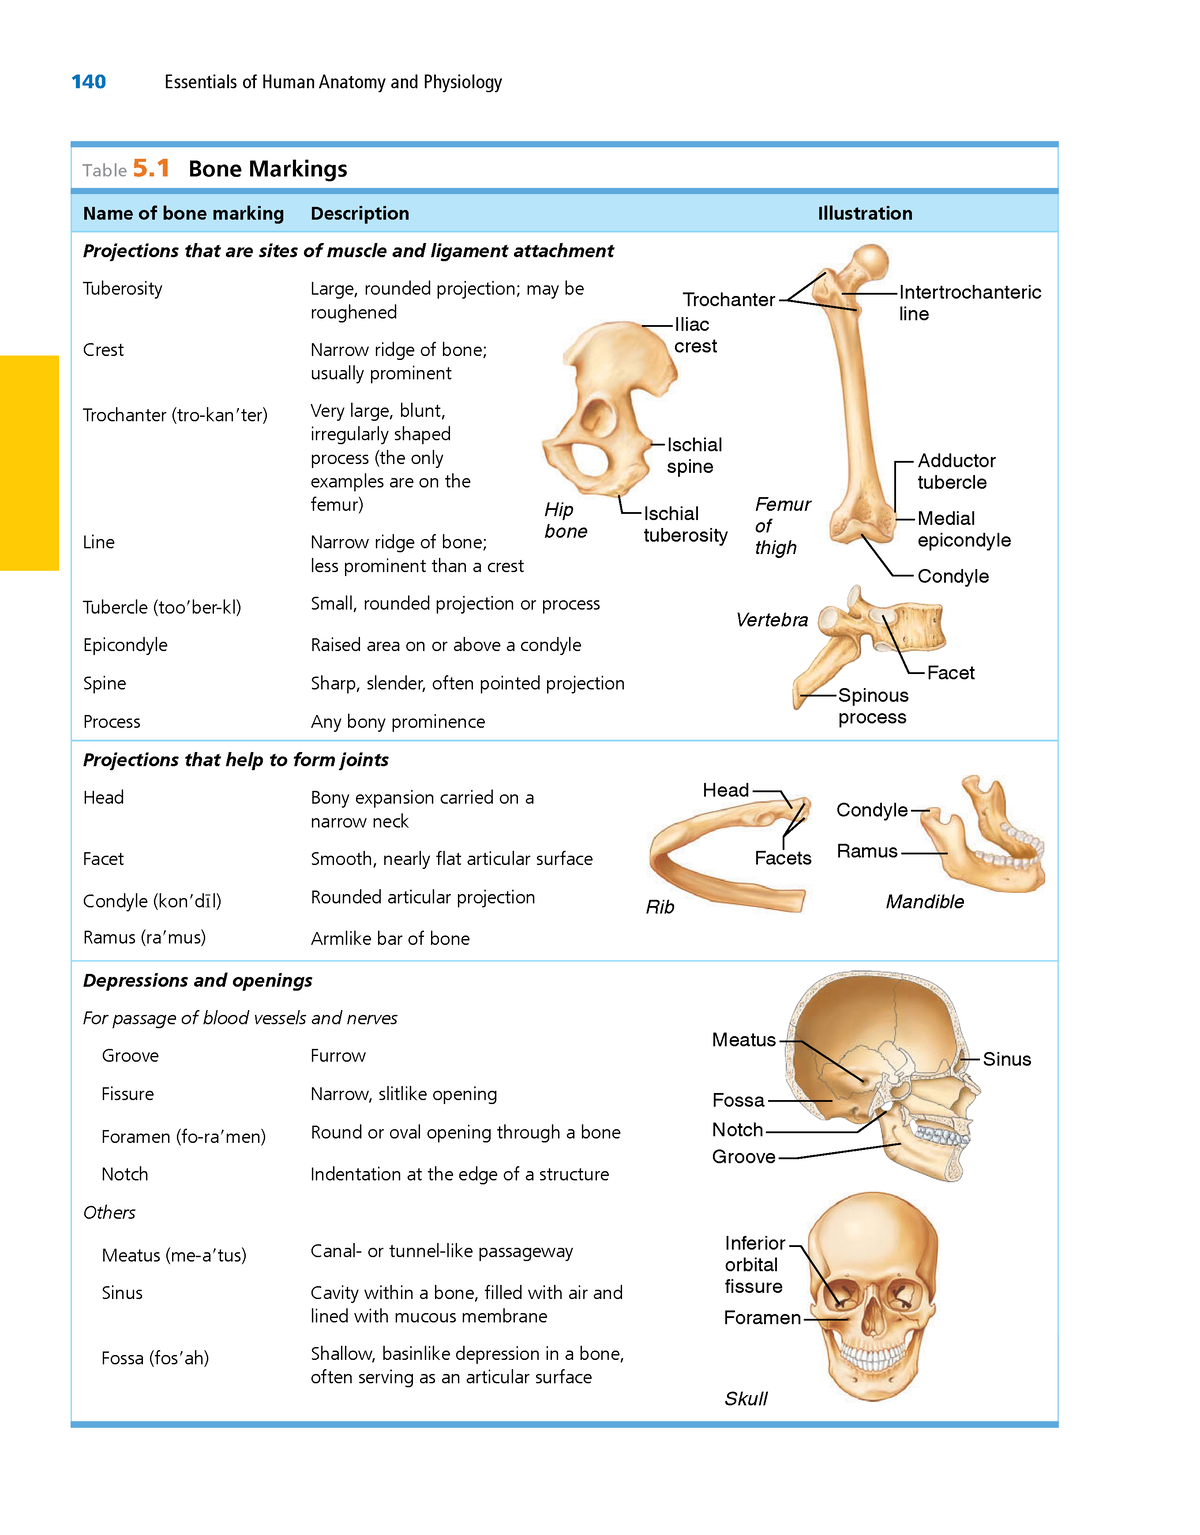 Anatomy and physiology 1-57 - 140 Essentials of Human Anatomy and ...